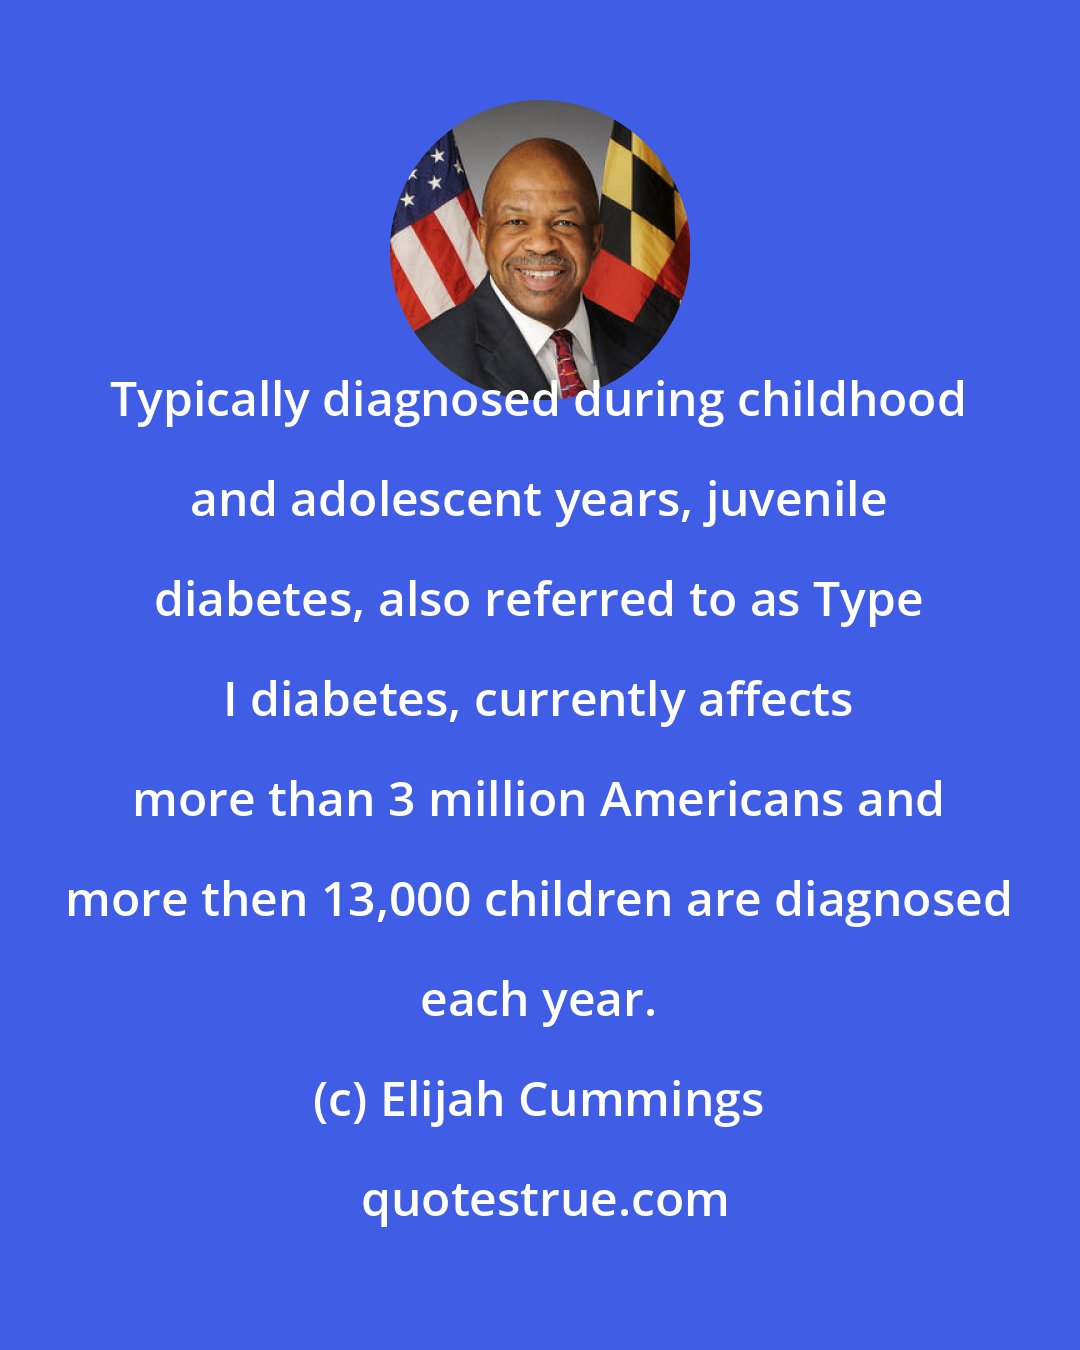 Elijah Cummings: Typically diagnosed during childhood and adolescent years, juvenile diabetes, also referred to as Type I diabetes, currently affects more than 3 million Americans and more then 13,000 children are diagnosed each year.